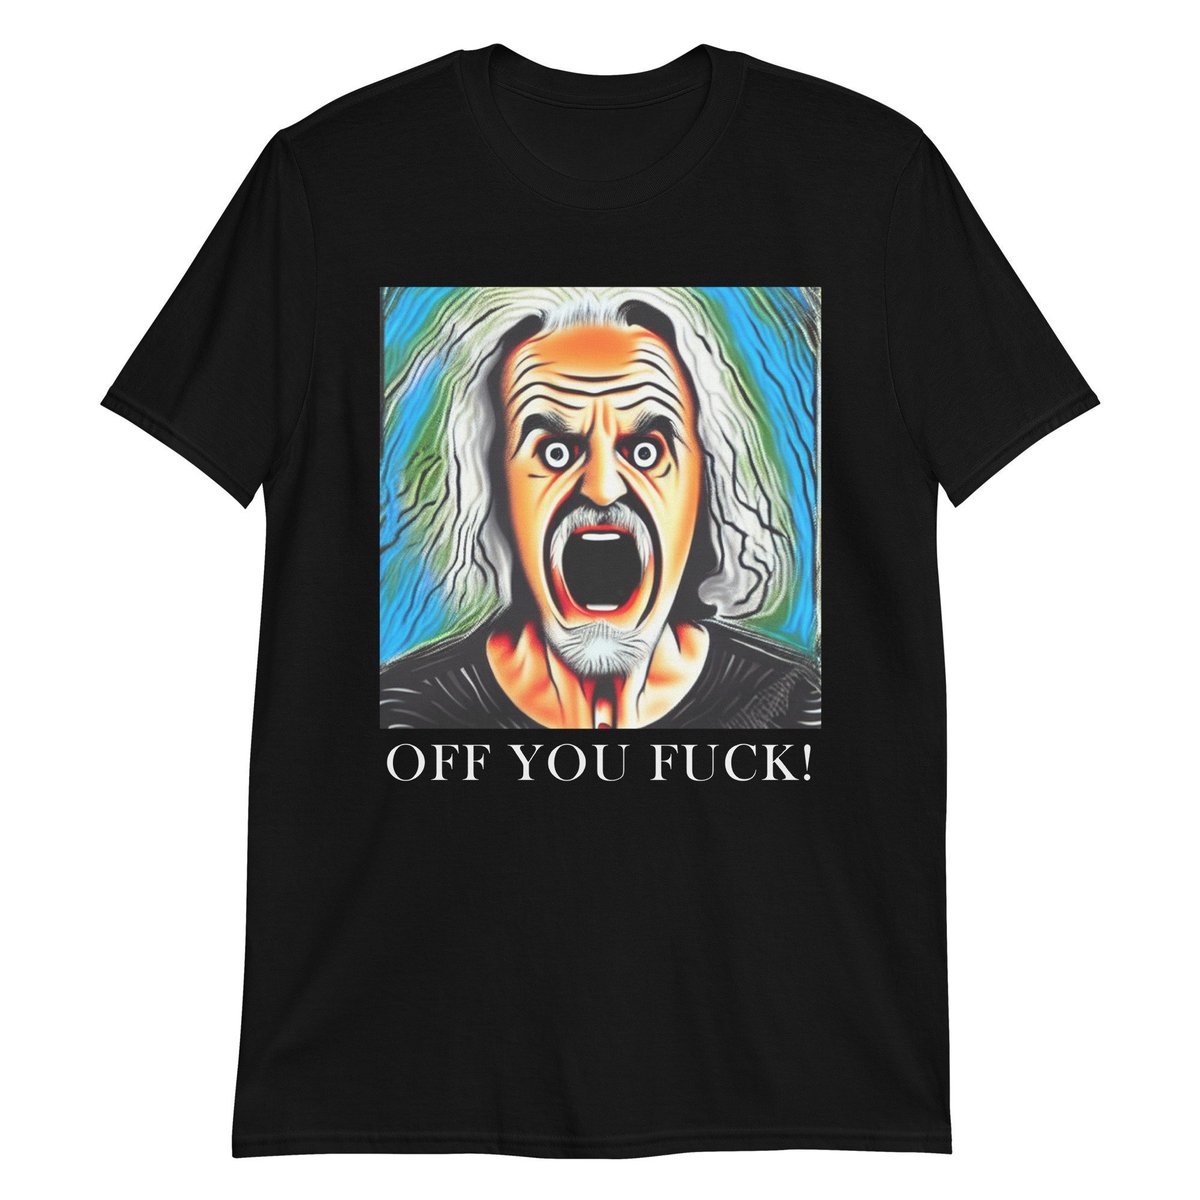 Billy Connolly The Big Yin 
In The Style of The Scream Painting 
Off You Fuck T-Shirt 
etsy.me/3Kah5oM 
#billyconnolly #thebigyin #bigyin #connolly #scottishcomedy #scotland #scottish #glasgow #scottishcomedian